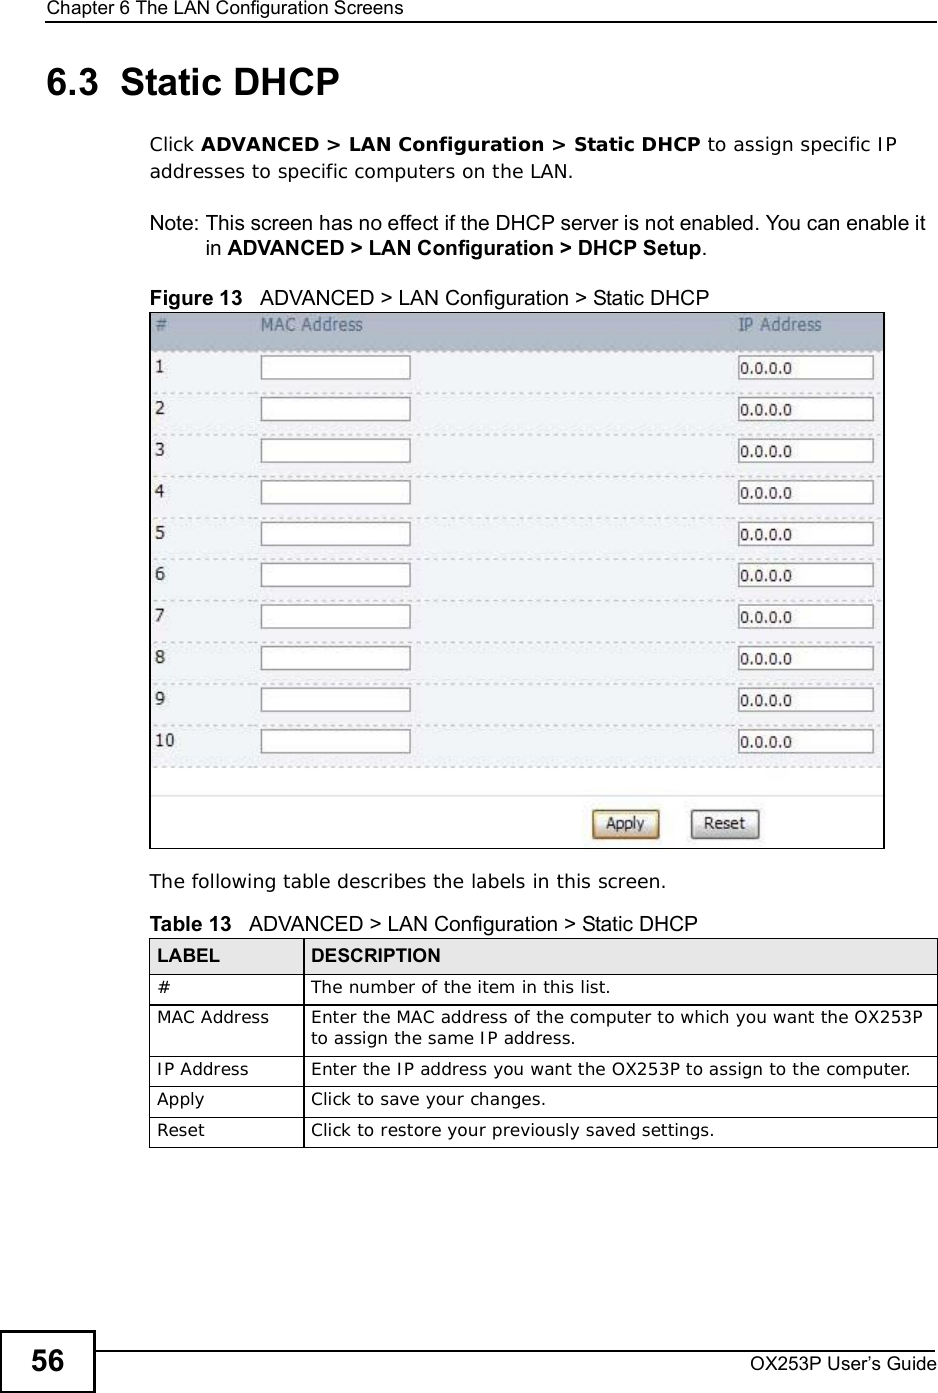 Chapter 6The LAN Configuration ScreensOX253P User’s Guide566.3  Static DHCPClick ADVANCED &gt; LAN Configuration &gt; Static DHCP to assign specific IP addresses to specific computers on the LAN.Note: This screen has no effect if the DHCP server is not enabled. You can enable it in ADVANCED &gt; LAN Configuration &gt; DHCP Setup.Figure 13   ADVANCED &gt; LAN Configuration &gt; Static DHCPThe following table describes the labels in this screen. Table 13   ADVANCED &gt; LAN Configuration &gt; Static DHCPLABEL DESCRIPTION#The number of the item in this list.MAC Address Enter the MAC address of the computer to which you want the OX253P to assign the same IP address.IP Address Enter the IP address you want the OX253P to assign to the computer.Apply Click to save your changes.Reset Click to restore your previously saved settings.